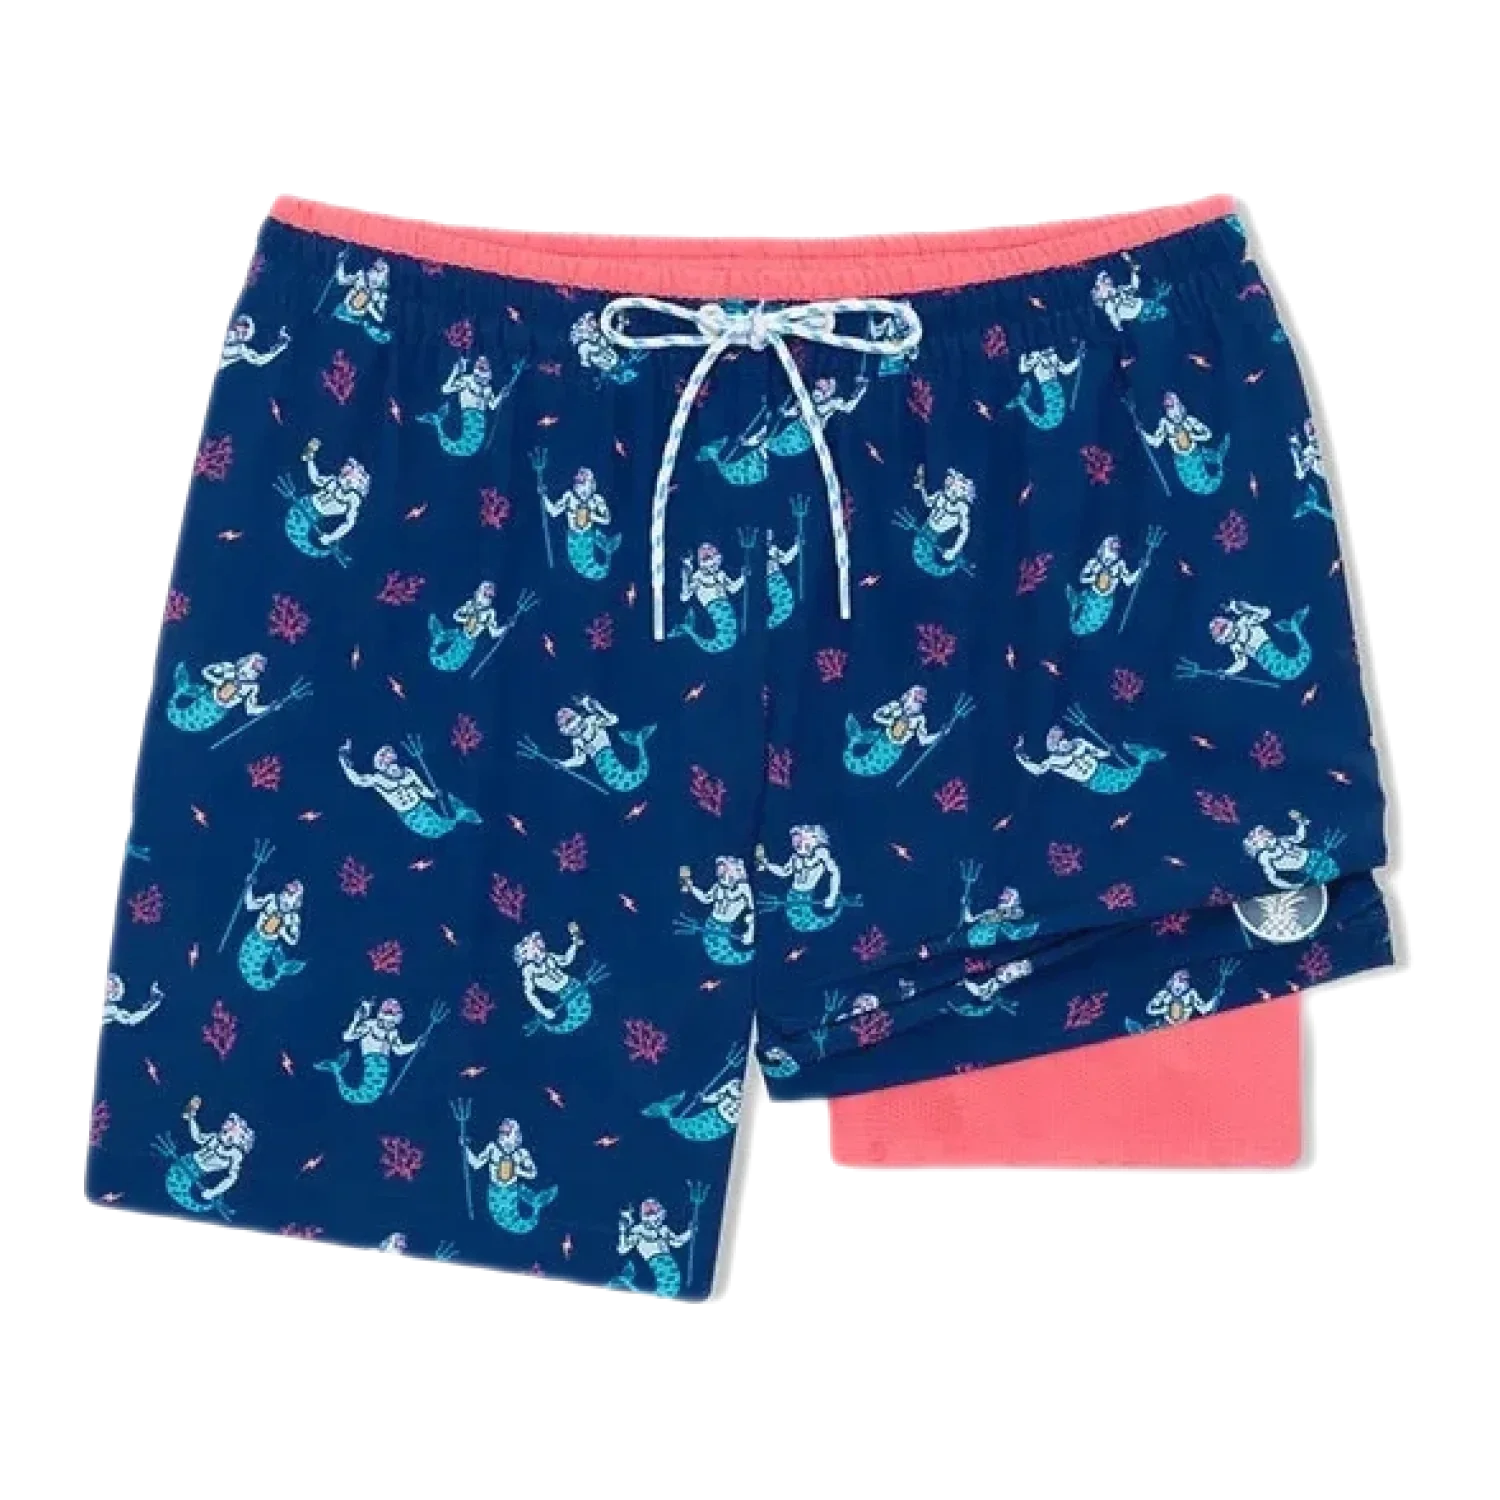 Chubbies 01. MENS APPAREL - MENS SHORTS - MENS SHORTS ACTIVE Men's The Classic Trunk - 5.5 in THE TRITON OF THE SEAS